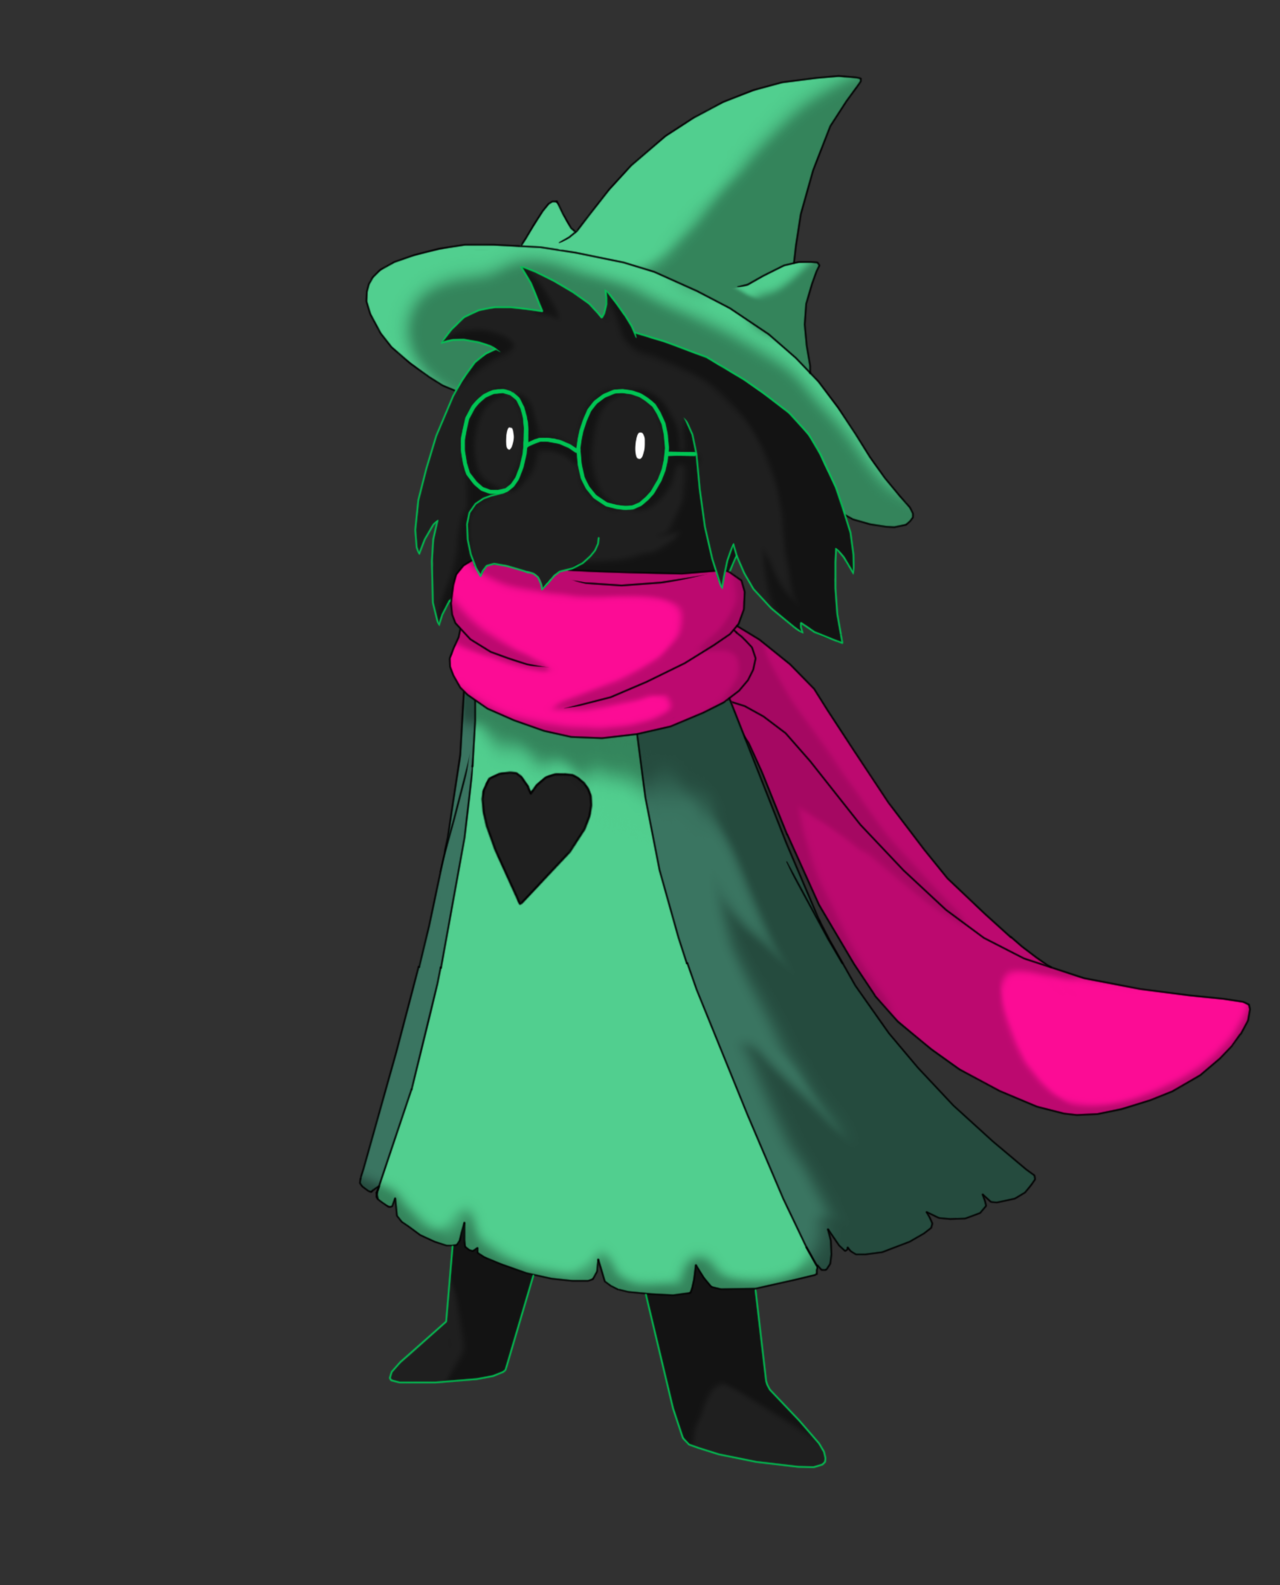 Ralsei from Deltarune! Had to draw him cause he's really cute! I still have a couple image I'd like to do for this. Drawings, Lucas the spider, Spyro the dragon